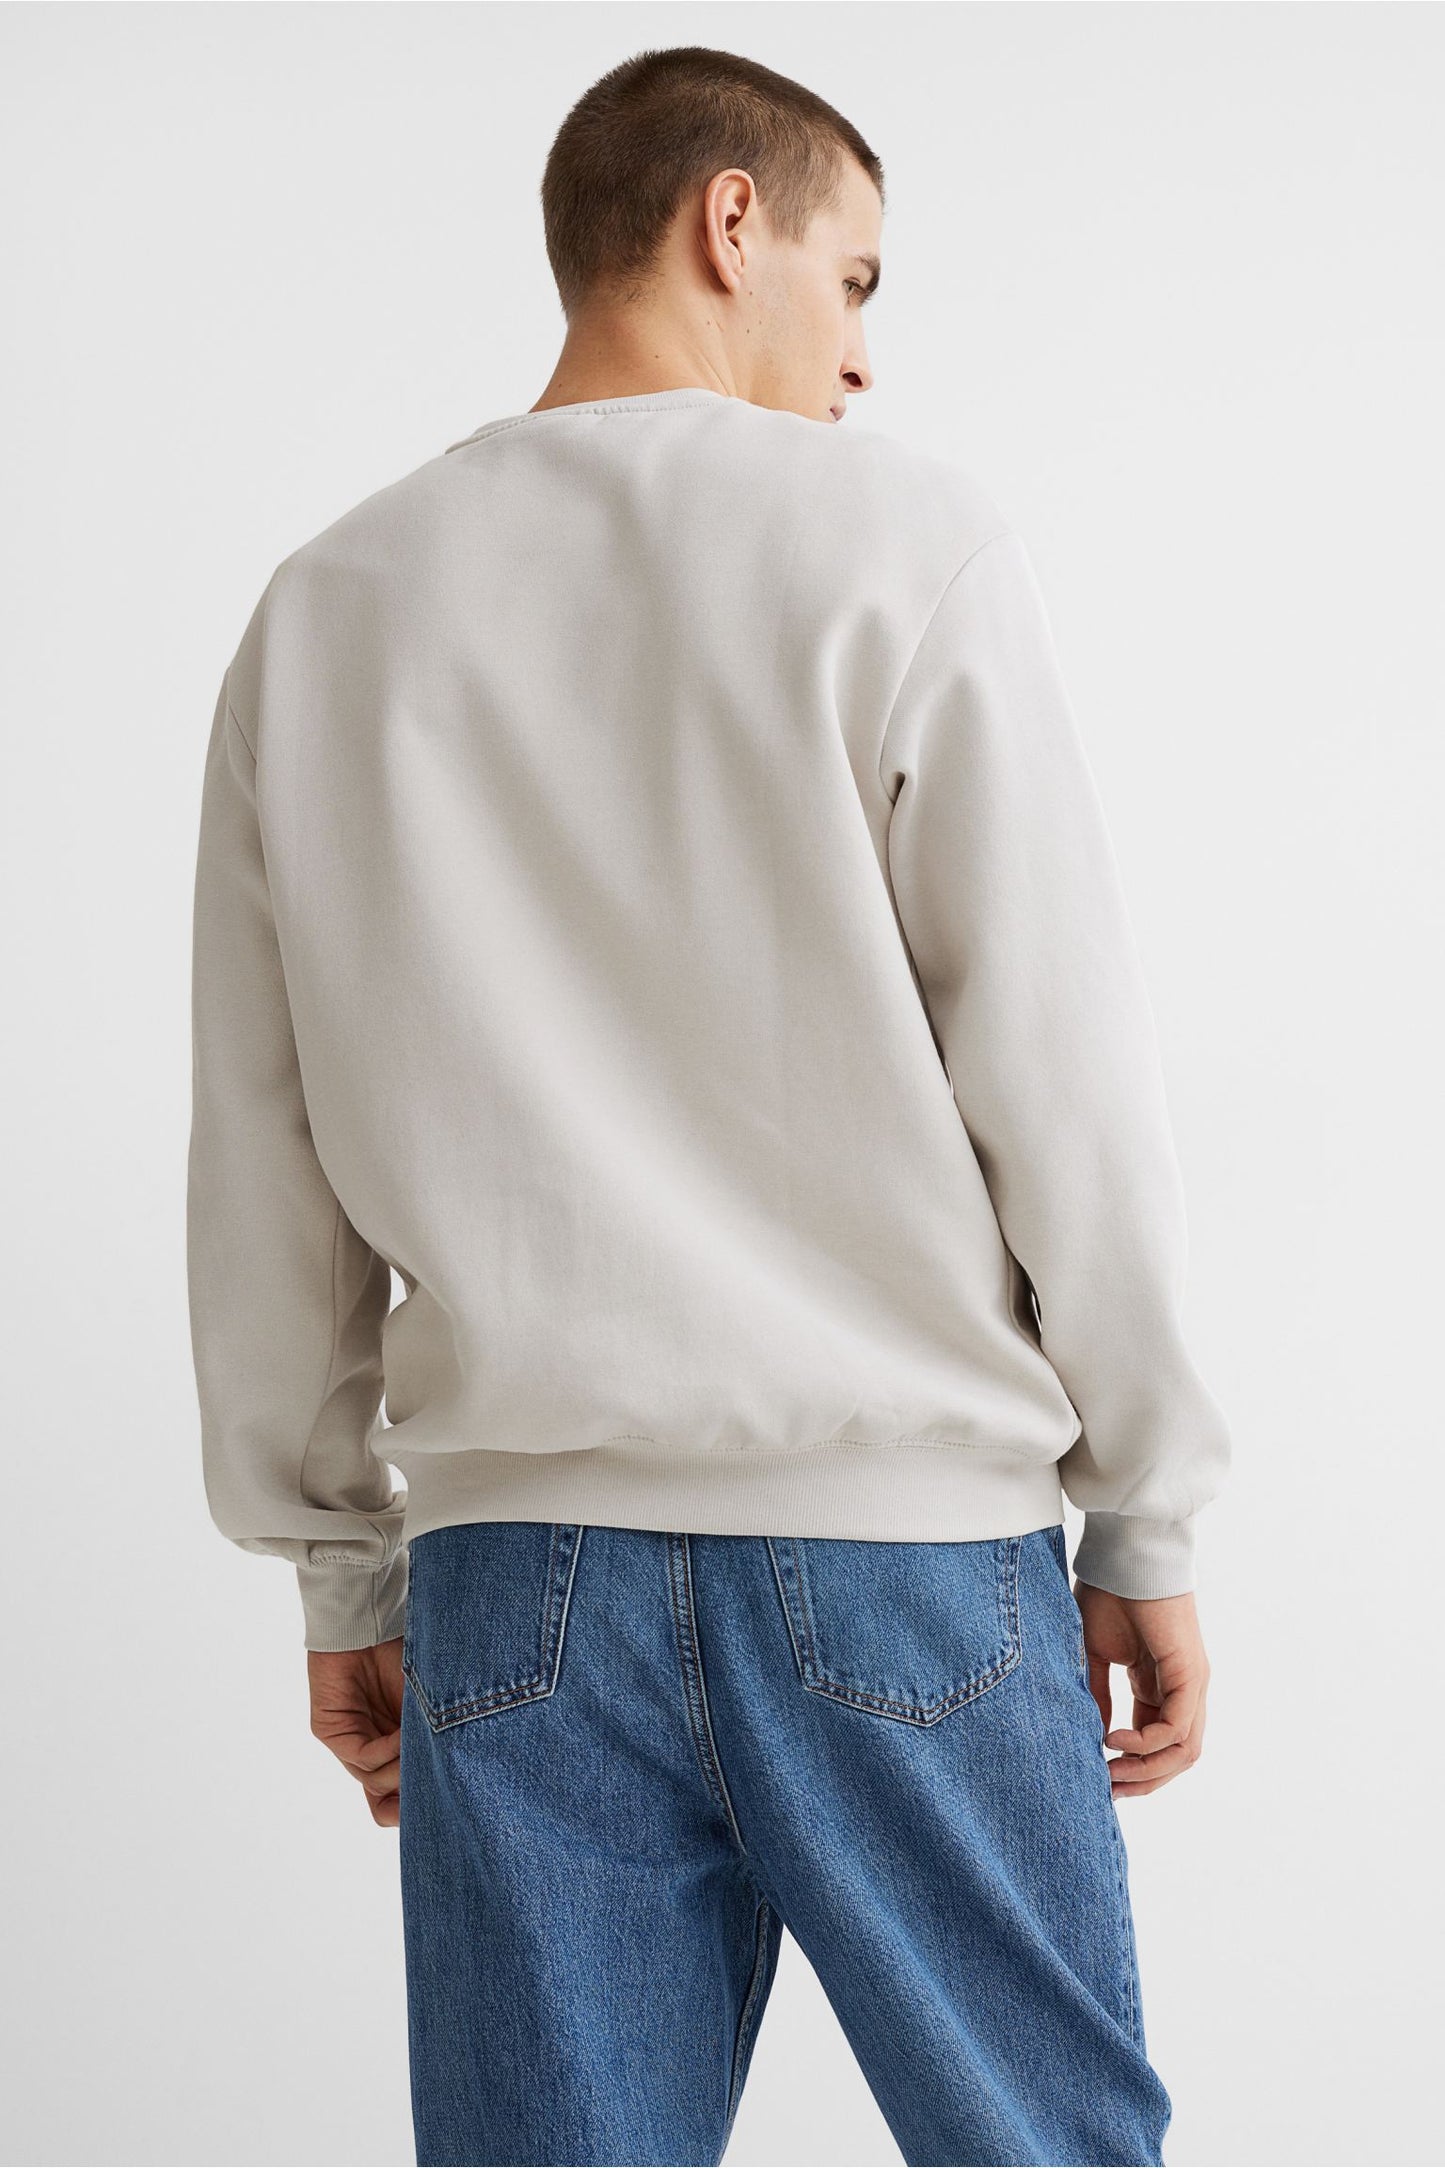 Relaxed Fit Sweatshirt-0970818018